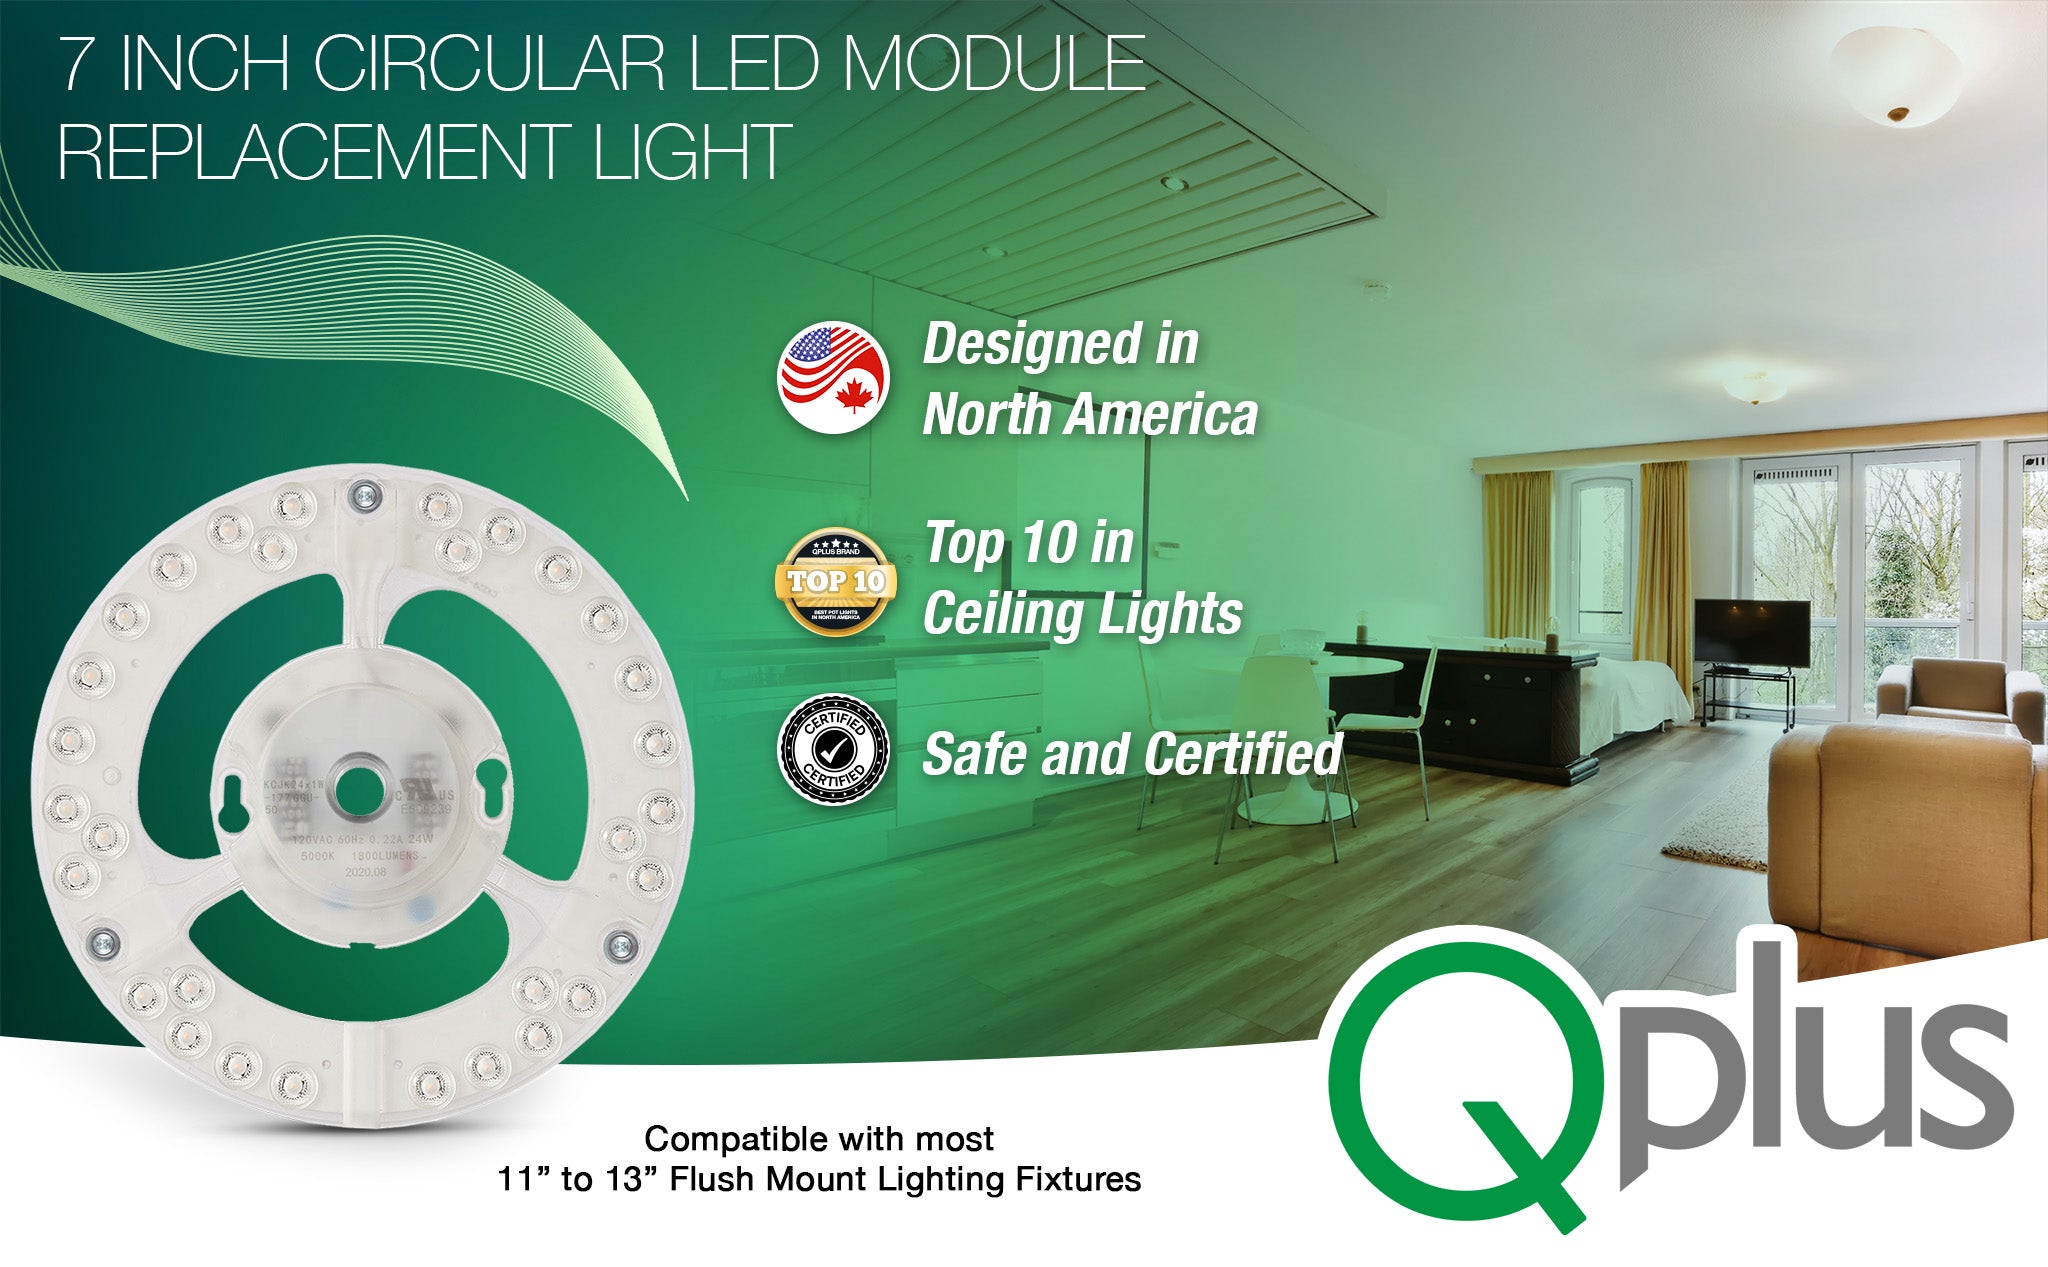 7 Inch Circular LED Module Replacement Light